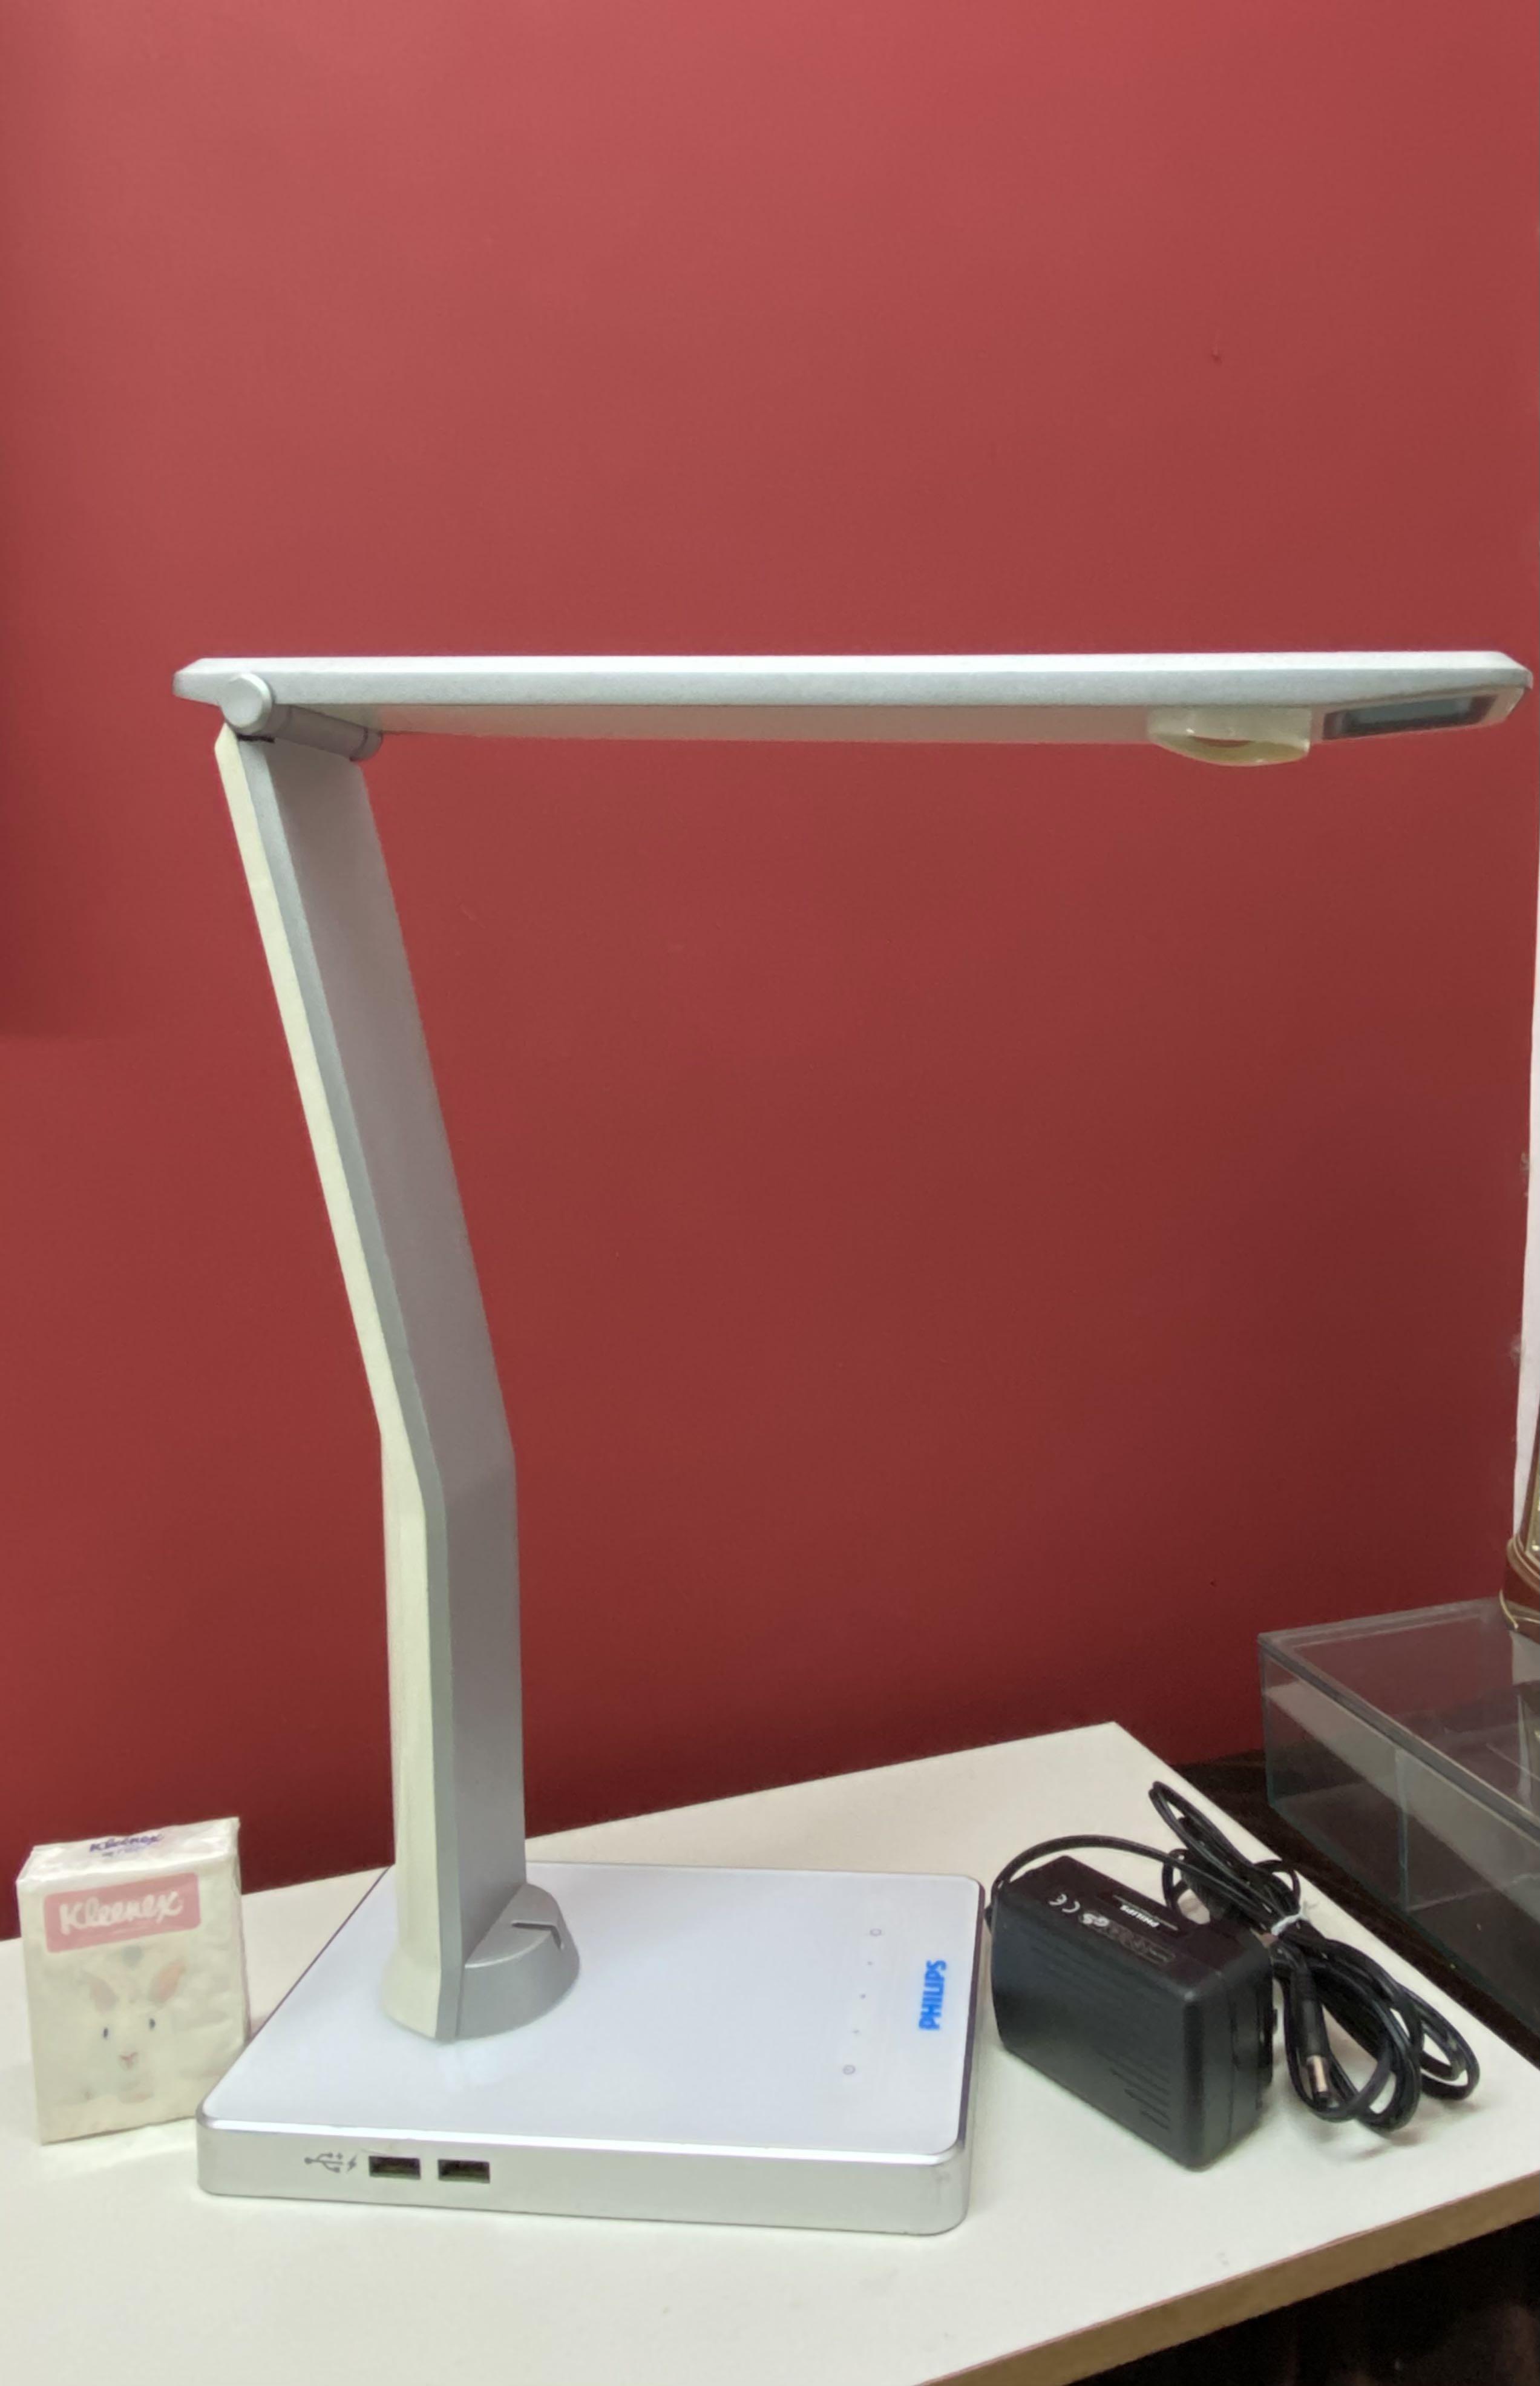 Philips I Care Led 5w Table Lamp 69195, Philips Led Table Lamp Model 69195